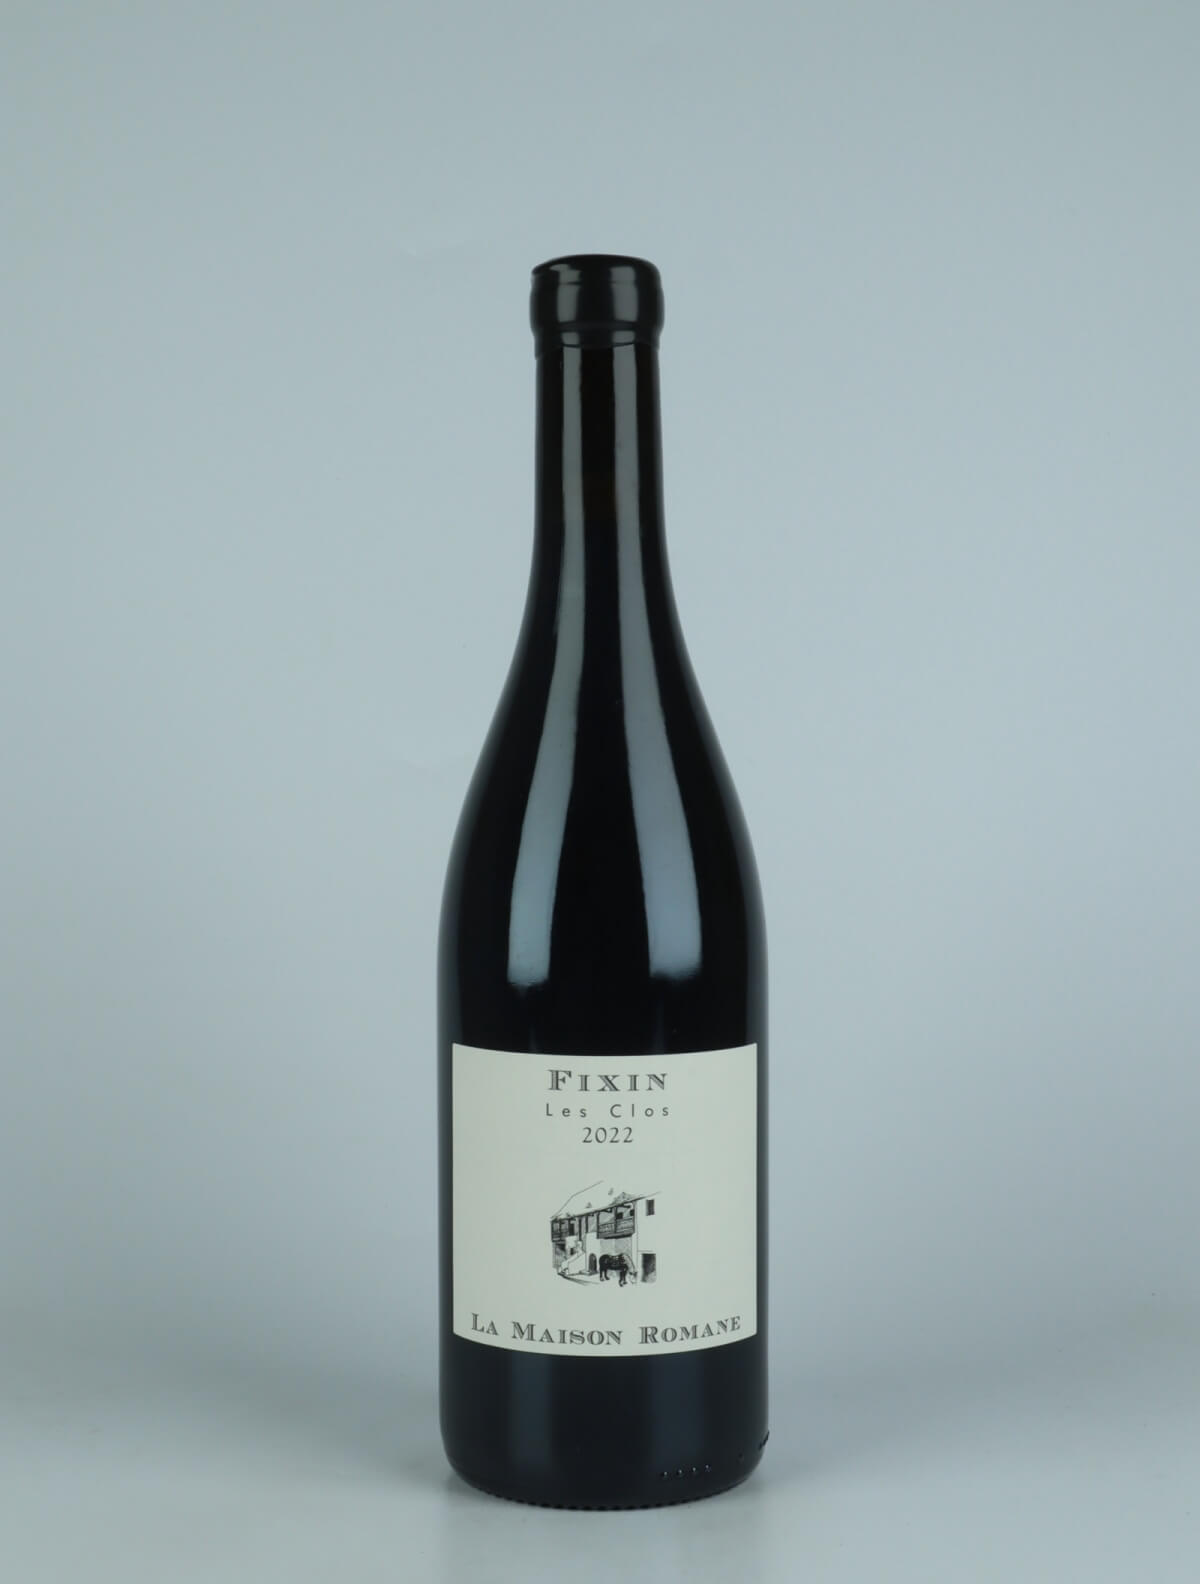 A bottle 2022 Fixin - Les Clos Red wine from La Maison Romane, Burgundy in France